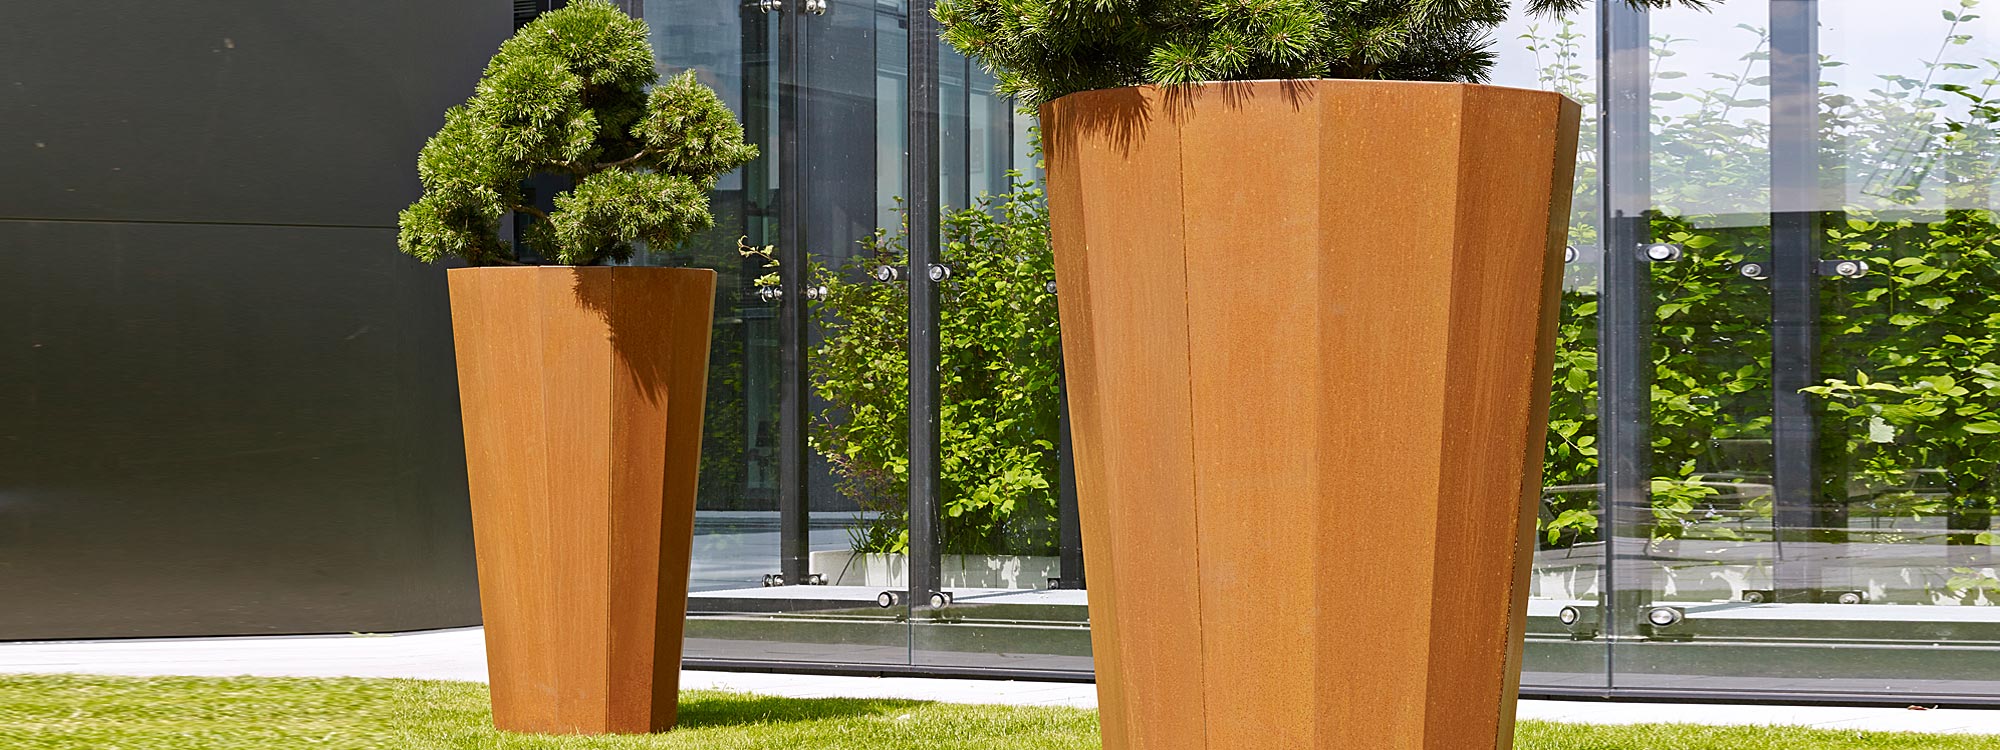 Image of pair of Iris tall corten planters by Flora, planted with small fir trees, shown outside large glass windows